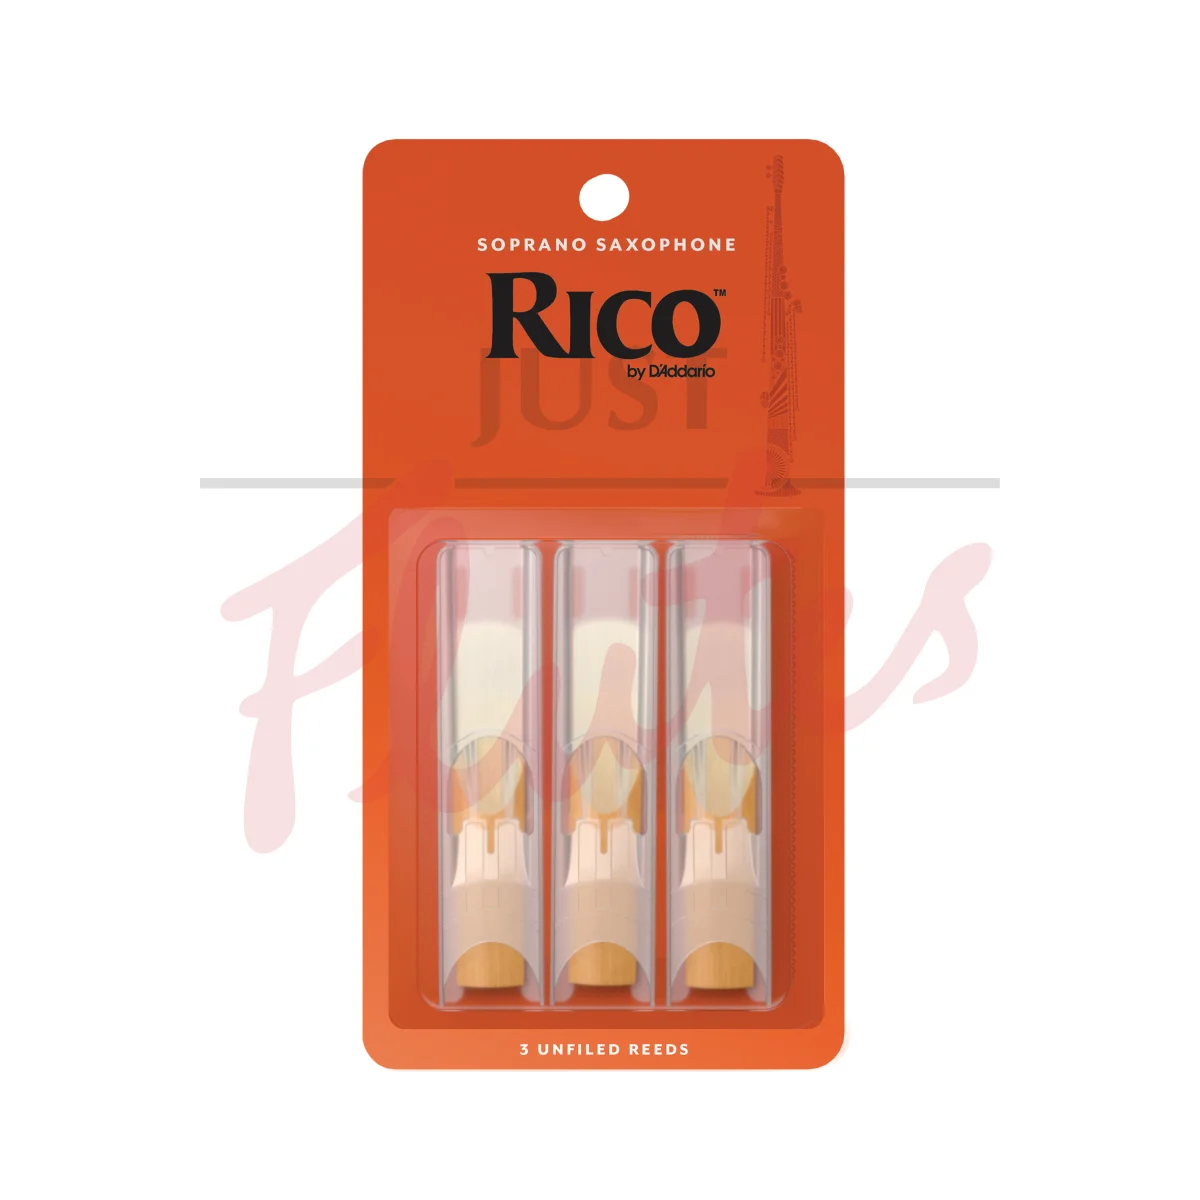 Rico by D'Addario RIA0330 Soprano Saxophone Reeds, Strength 3, Pack of 3